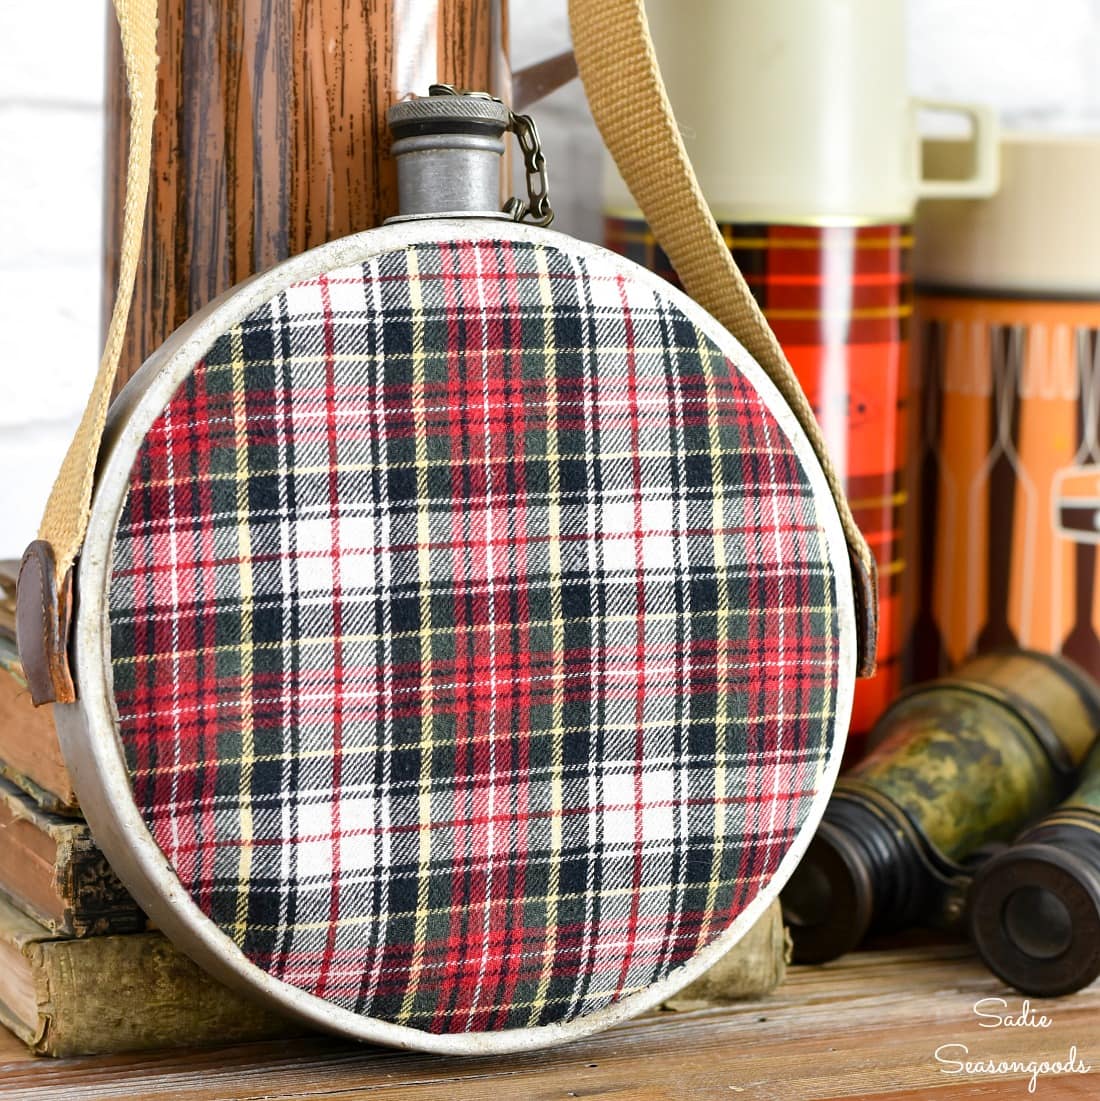 Upcycling a metal canteen into plaid decor